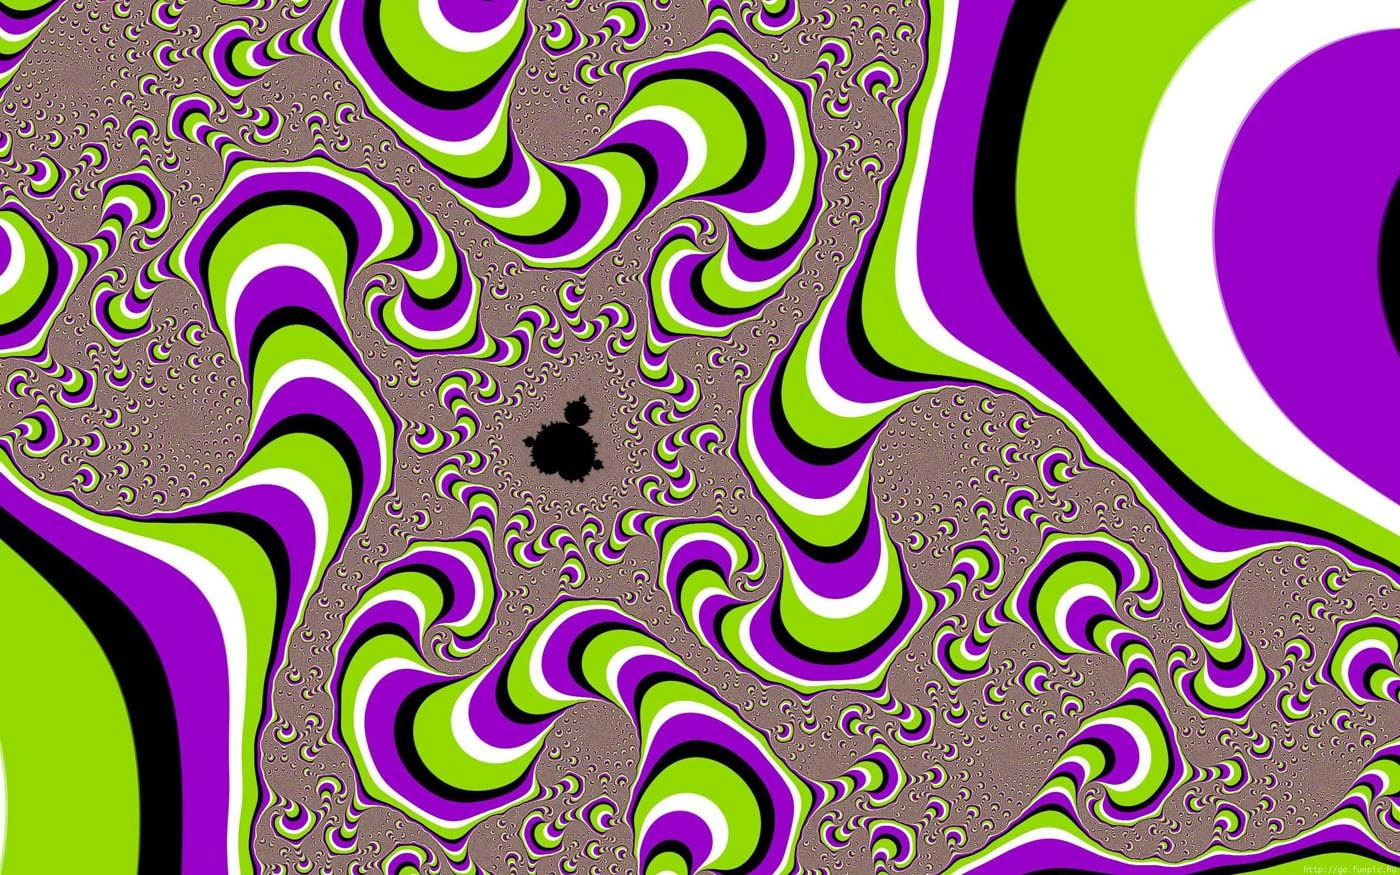 Optical illusion wallpaper, fractal, psychedelic, artwork, multi colored